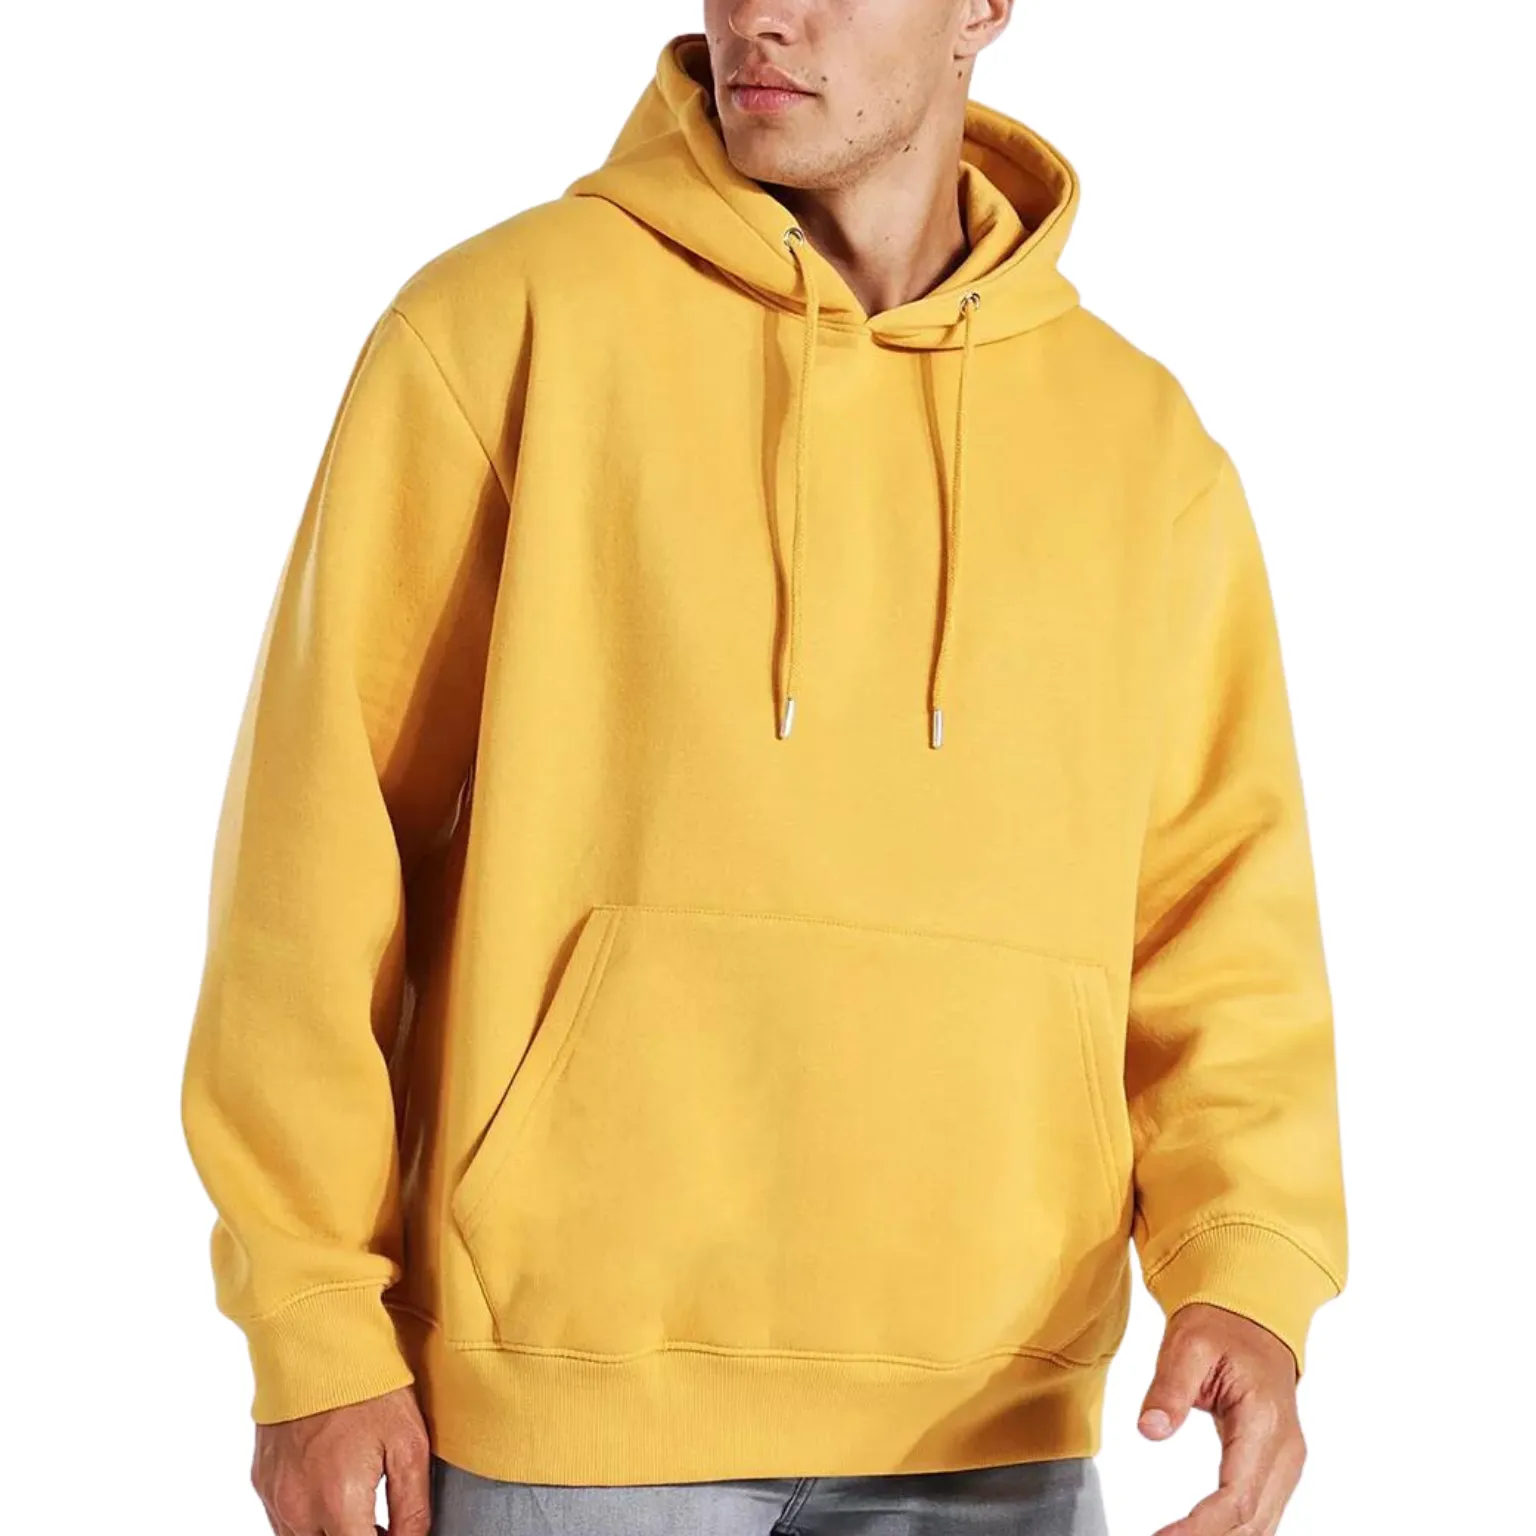 Oversized Hoodie manufacturing with trendy designs